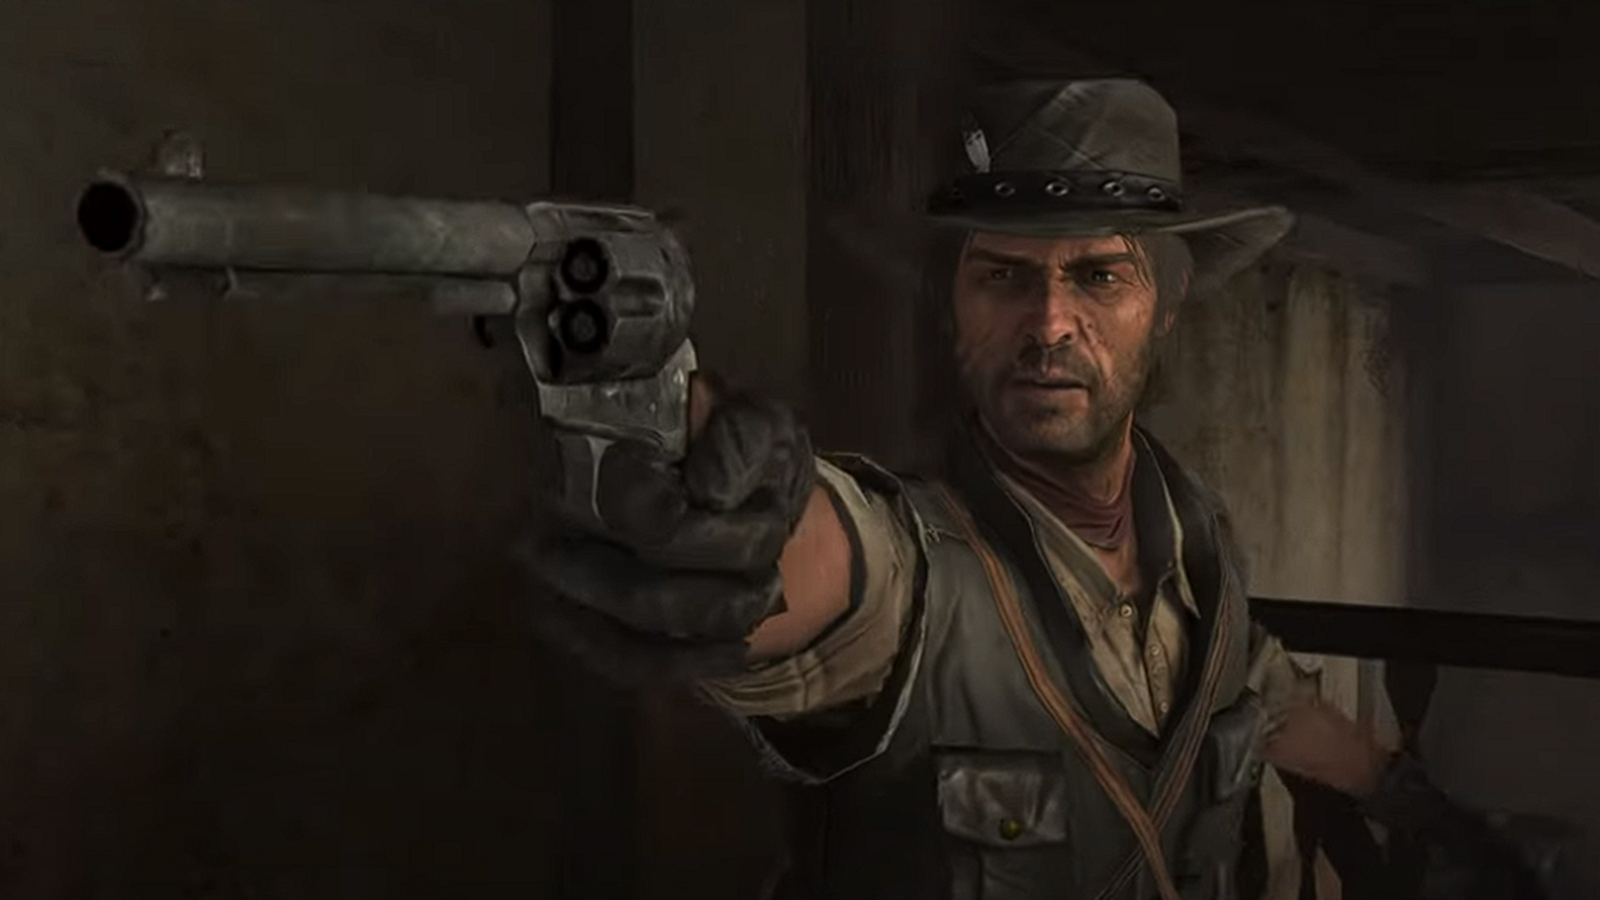 New UNREAL ENGINE 5 Games like Red Dead Redemption coming out in